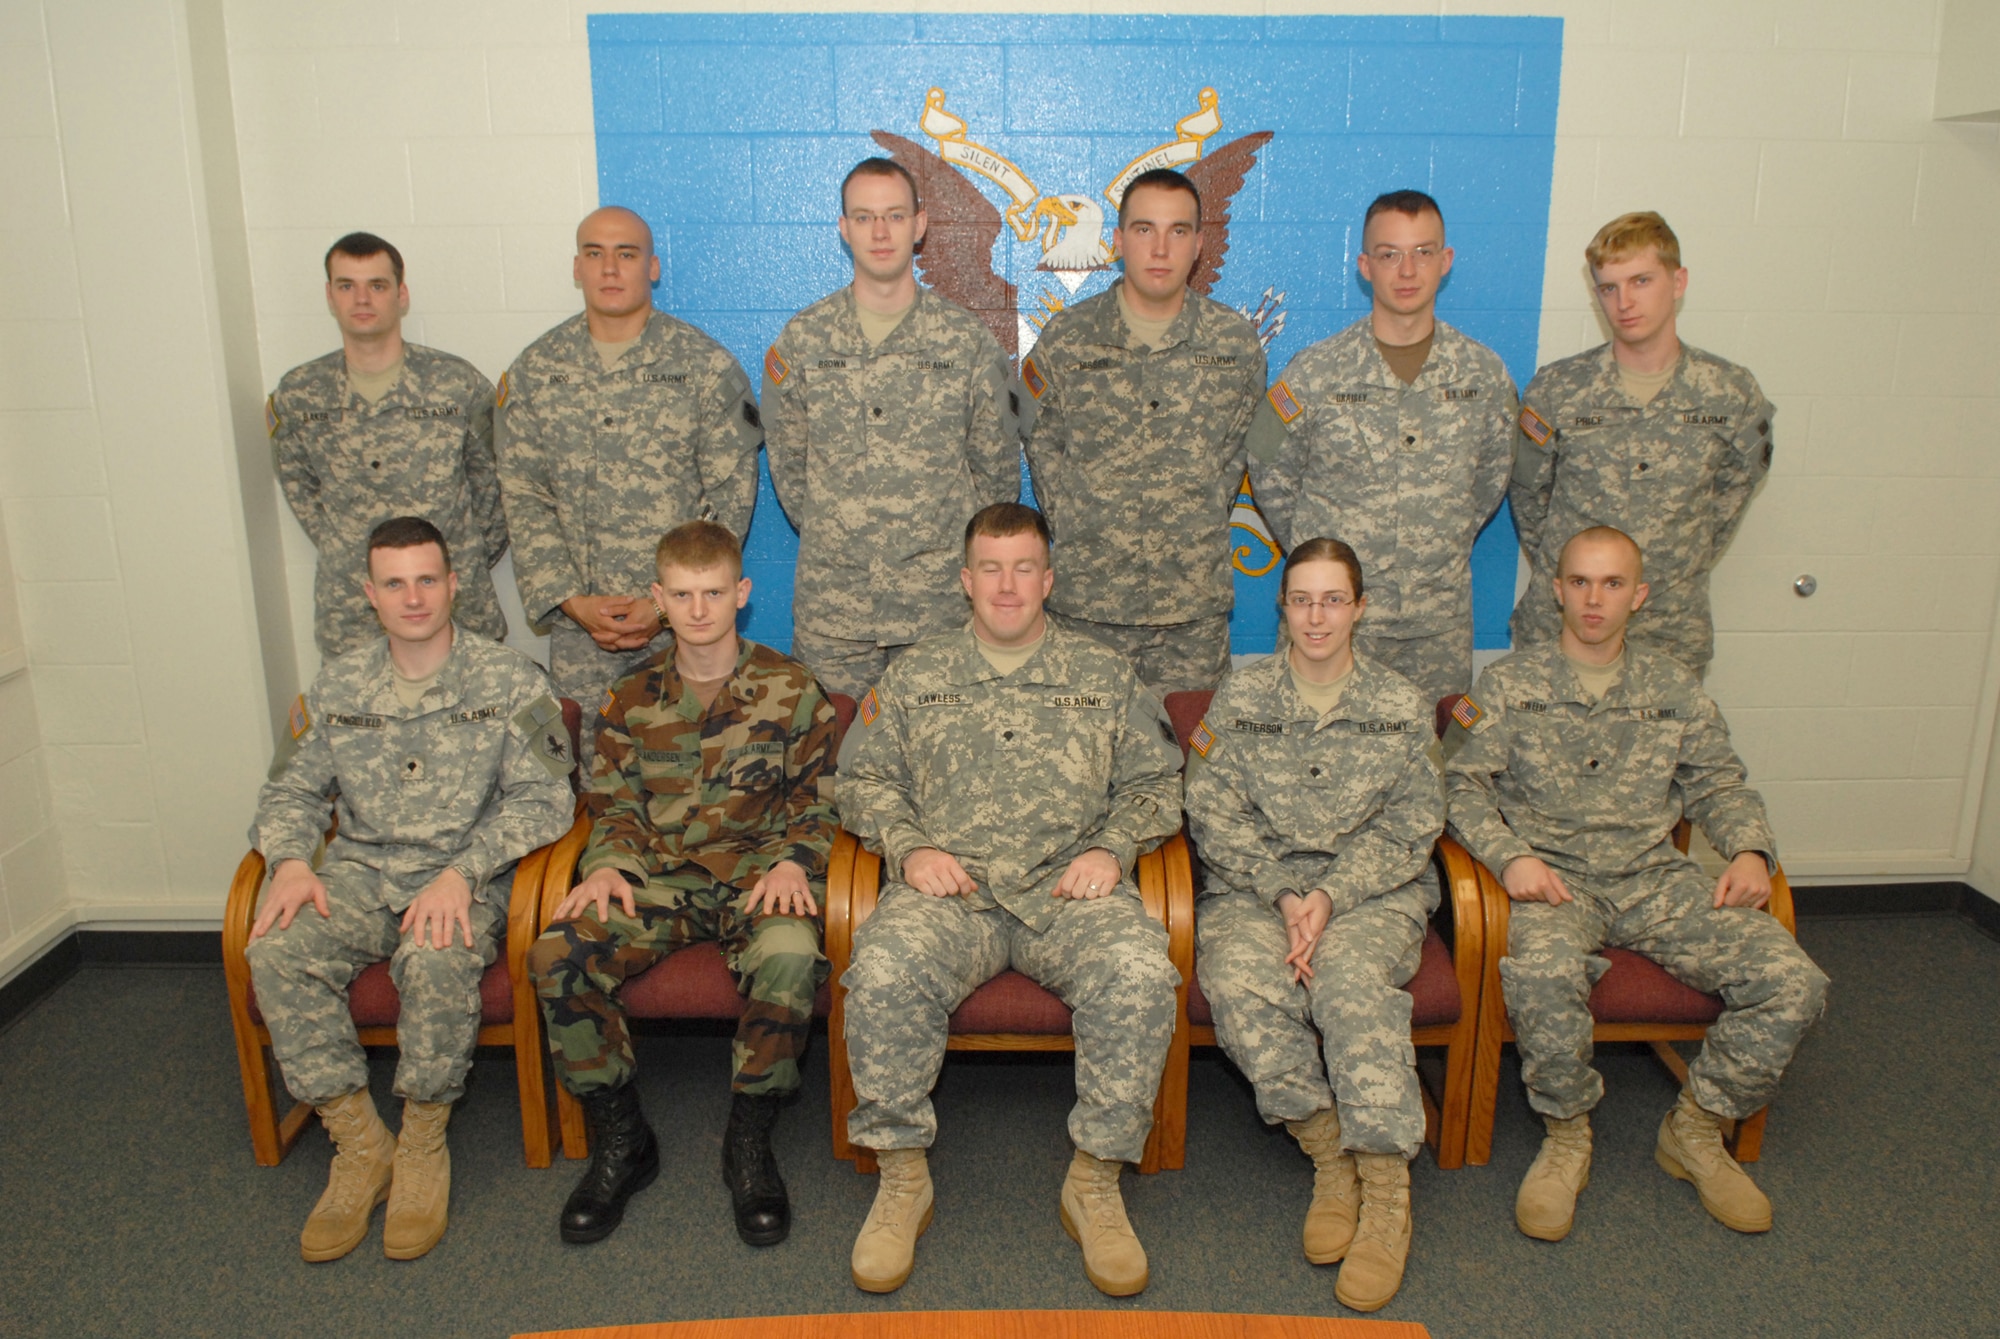 Eleven student Soldiers from the first-ever Iraqi Dialect Course pose for a group photo after a graduation ceremony at the 344th Military Intelligence Battalion. Pictured are (front row from left to right): Specialists Michael D'Angiollilo, Jason Andersen, Jason Lawless, Kady Peterson, Nathan Sweem, (back row from left to right) Bradly Baker, Alexander Endo, Douglas Brown, Joshua Nissen, Kyle Draisey and Paul Price.

The eight-week-long course began Feb. 5. The next course begins on May 7. According to 344 MIBn personnel, the Iraqi Dialect Course will enable linguist Soldiers to provide much-improved signal intelligence support to Army and joint commanders in support of Operation Iraqi Freedom. (U.S. Air Force photo by Tech. Sgt. Randy Mallard)
